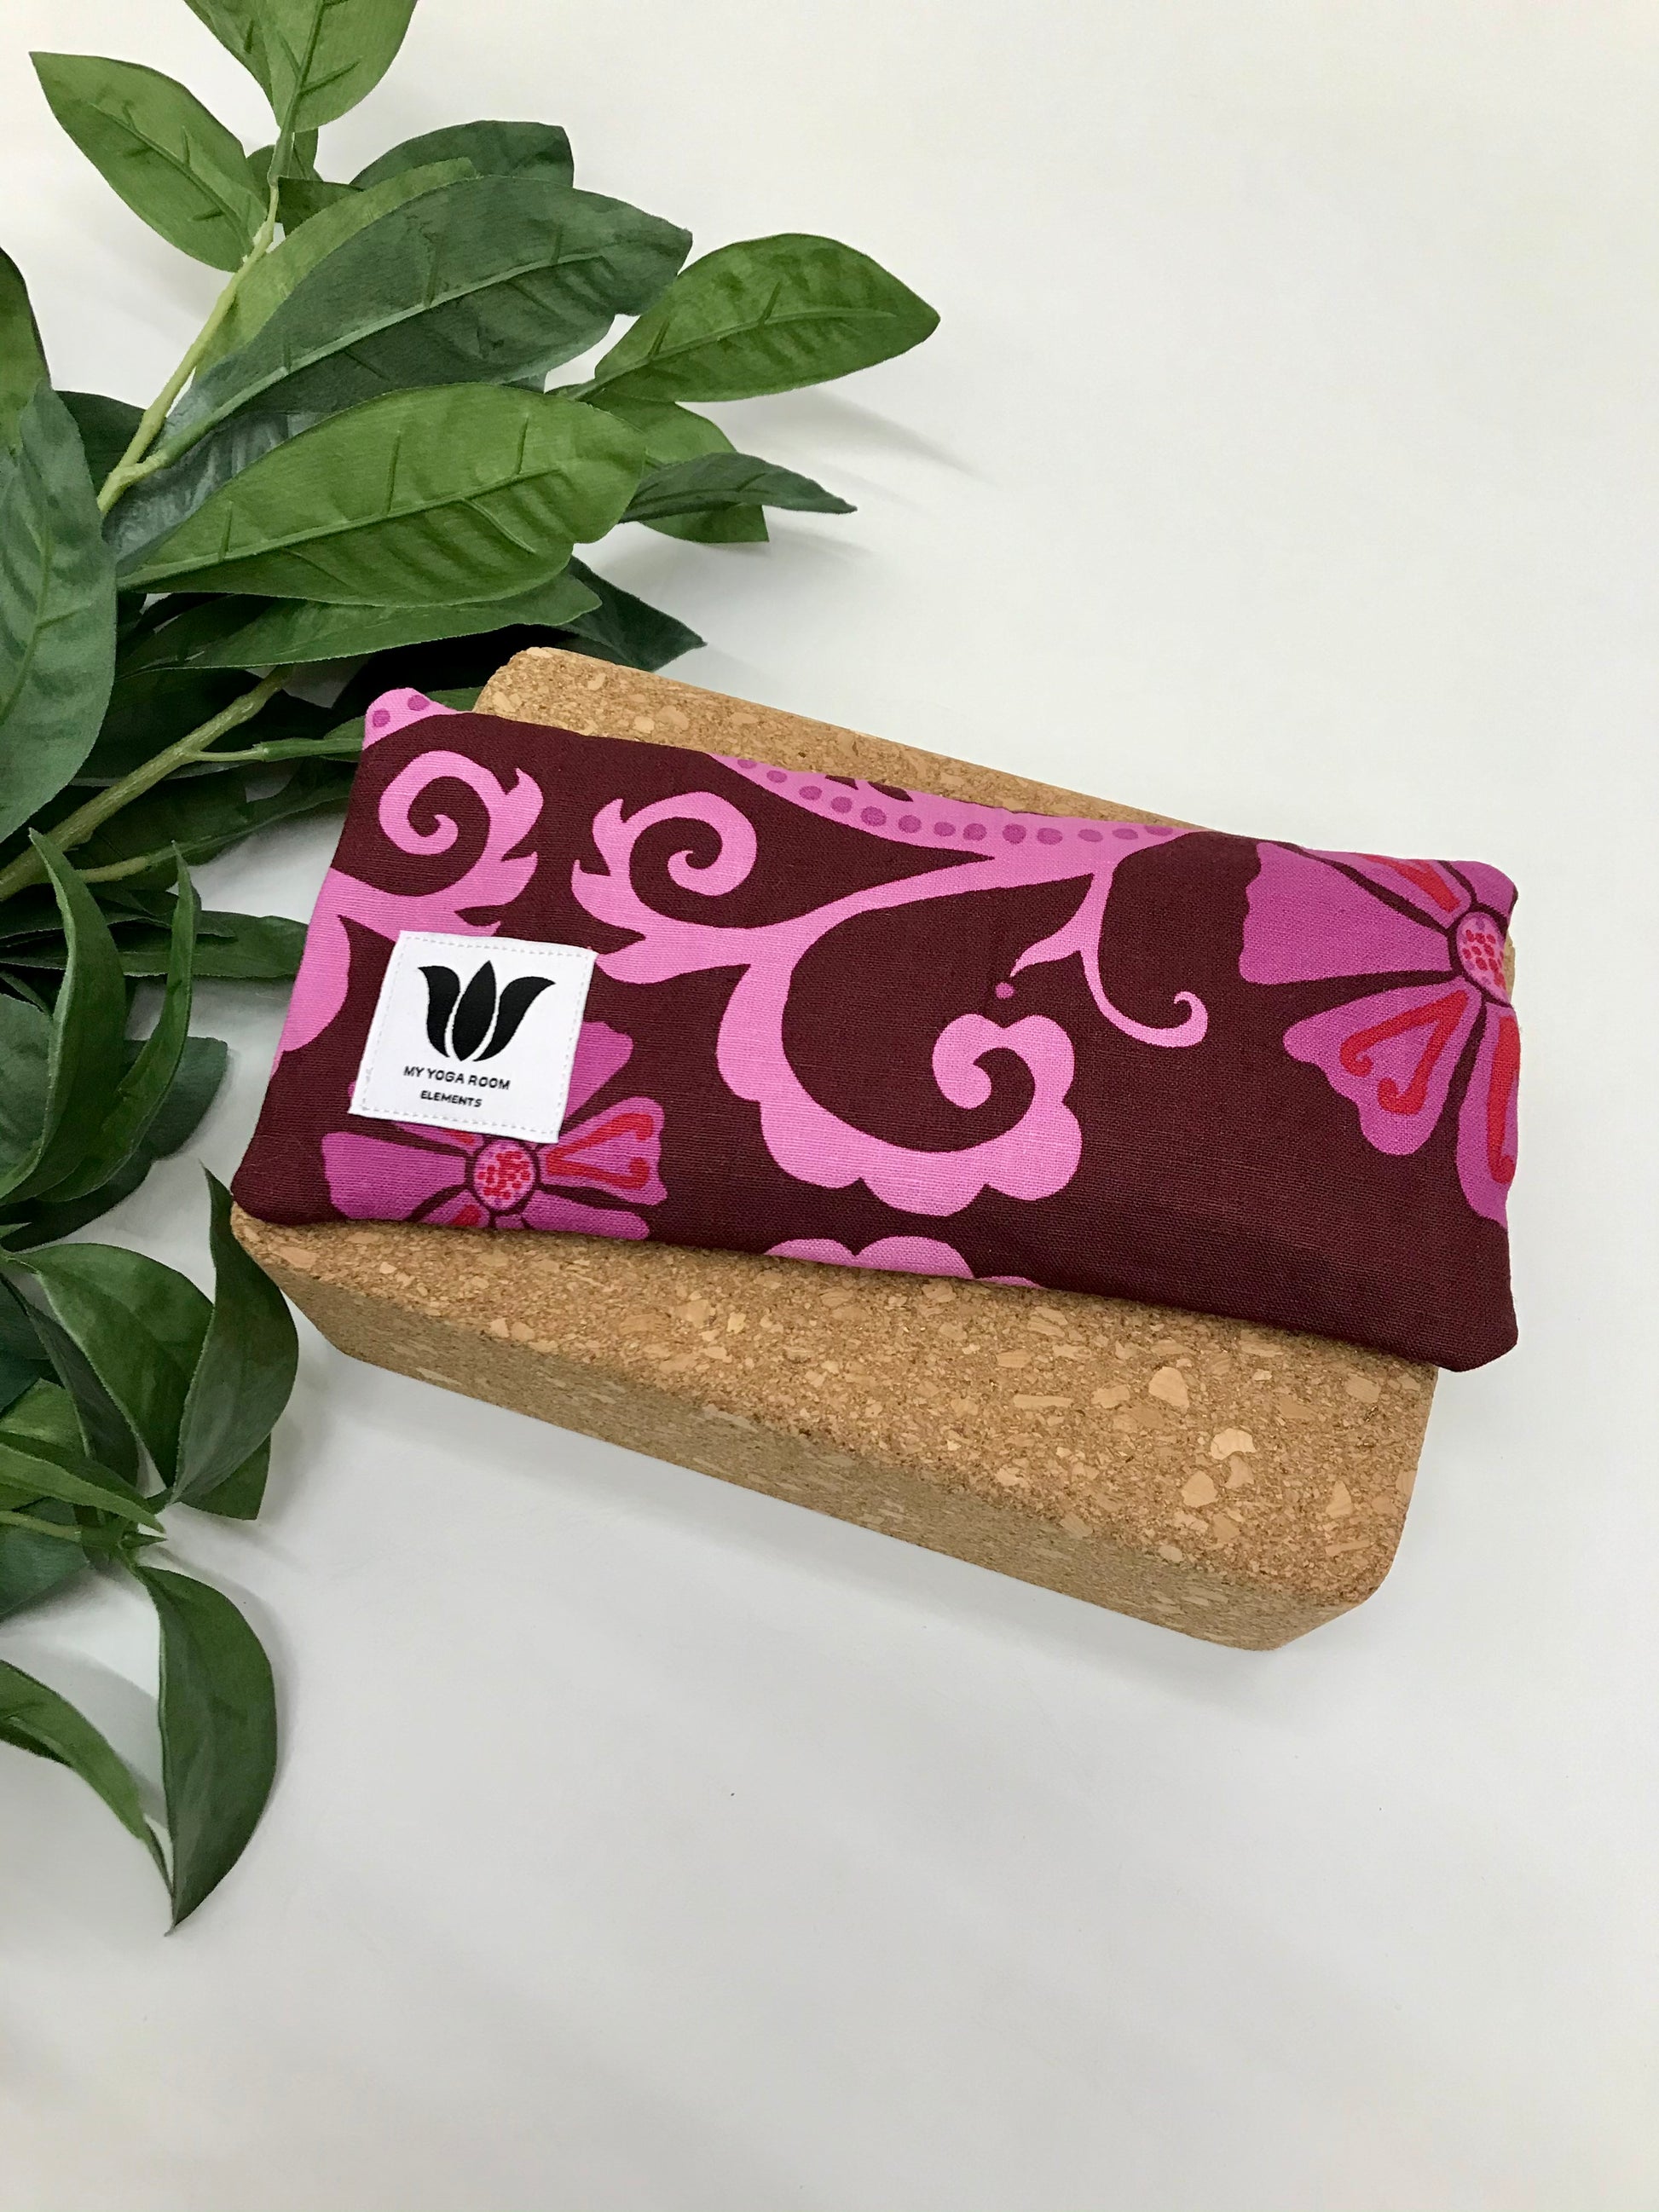 Yoga eye pillow, unscented, therapeutically weighted to soothe eye strain and stress or enhance your savasana. Handcrafted in Canada by My Yoga Room Elements. Pink purple modern floral print and bamboo fabric.